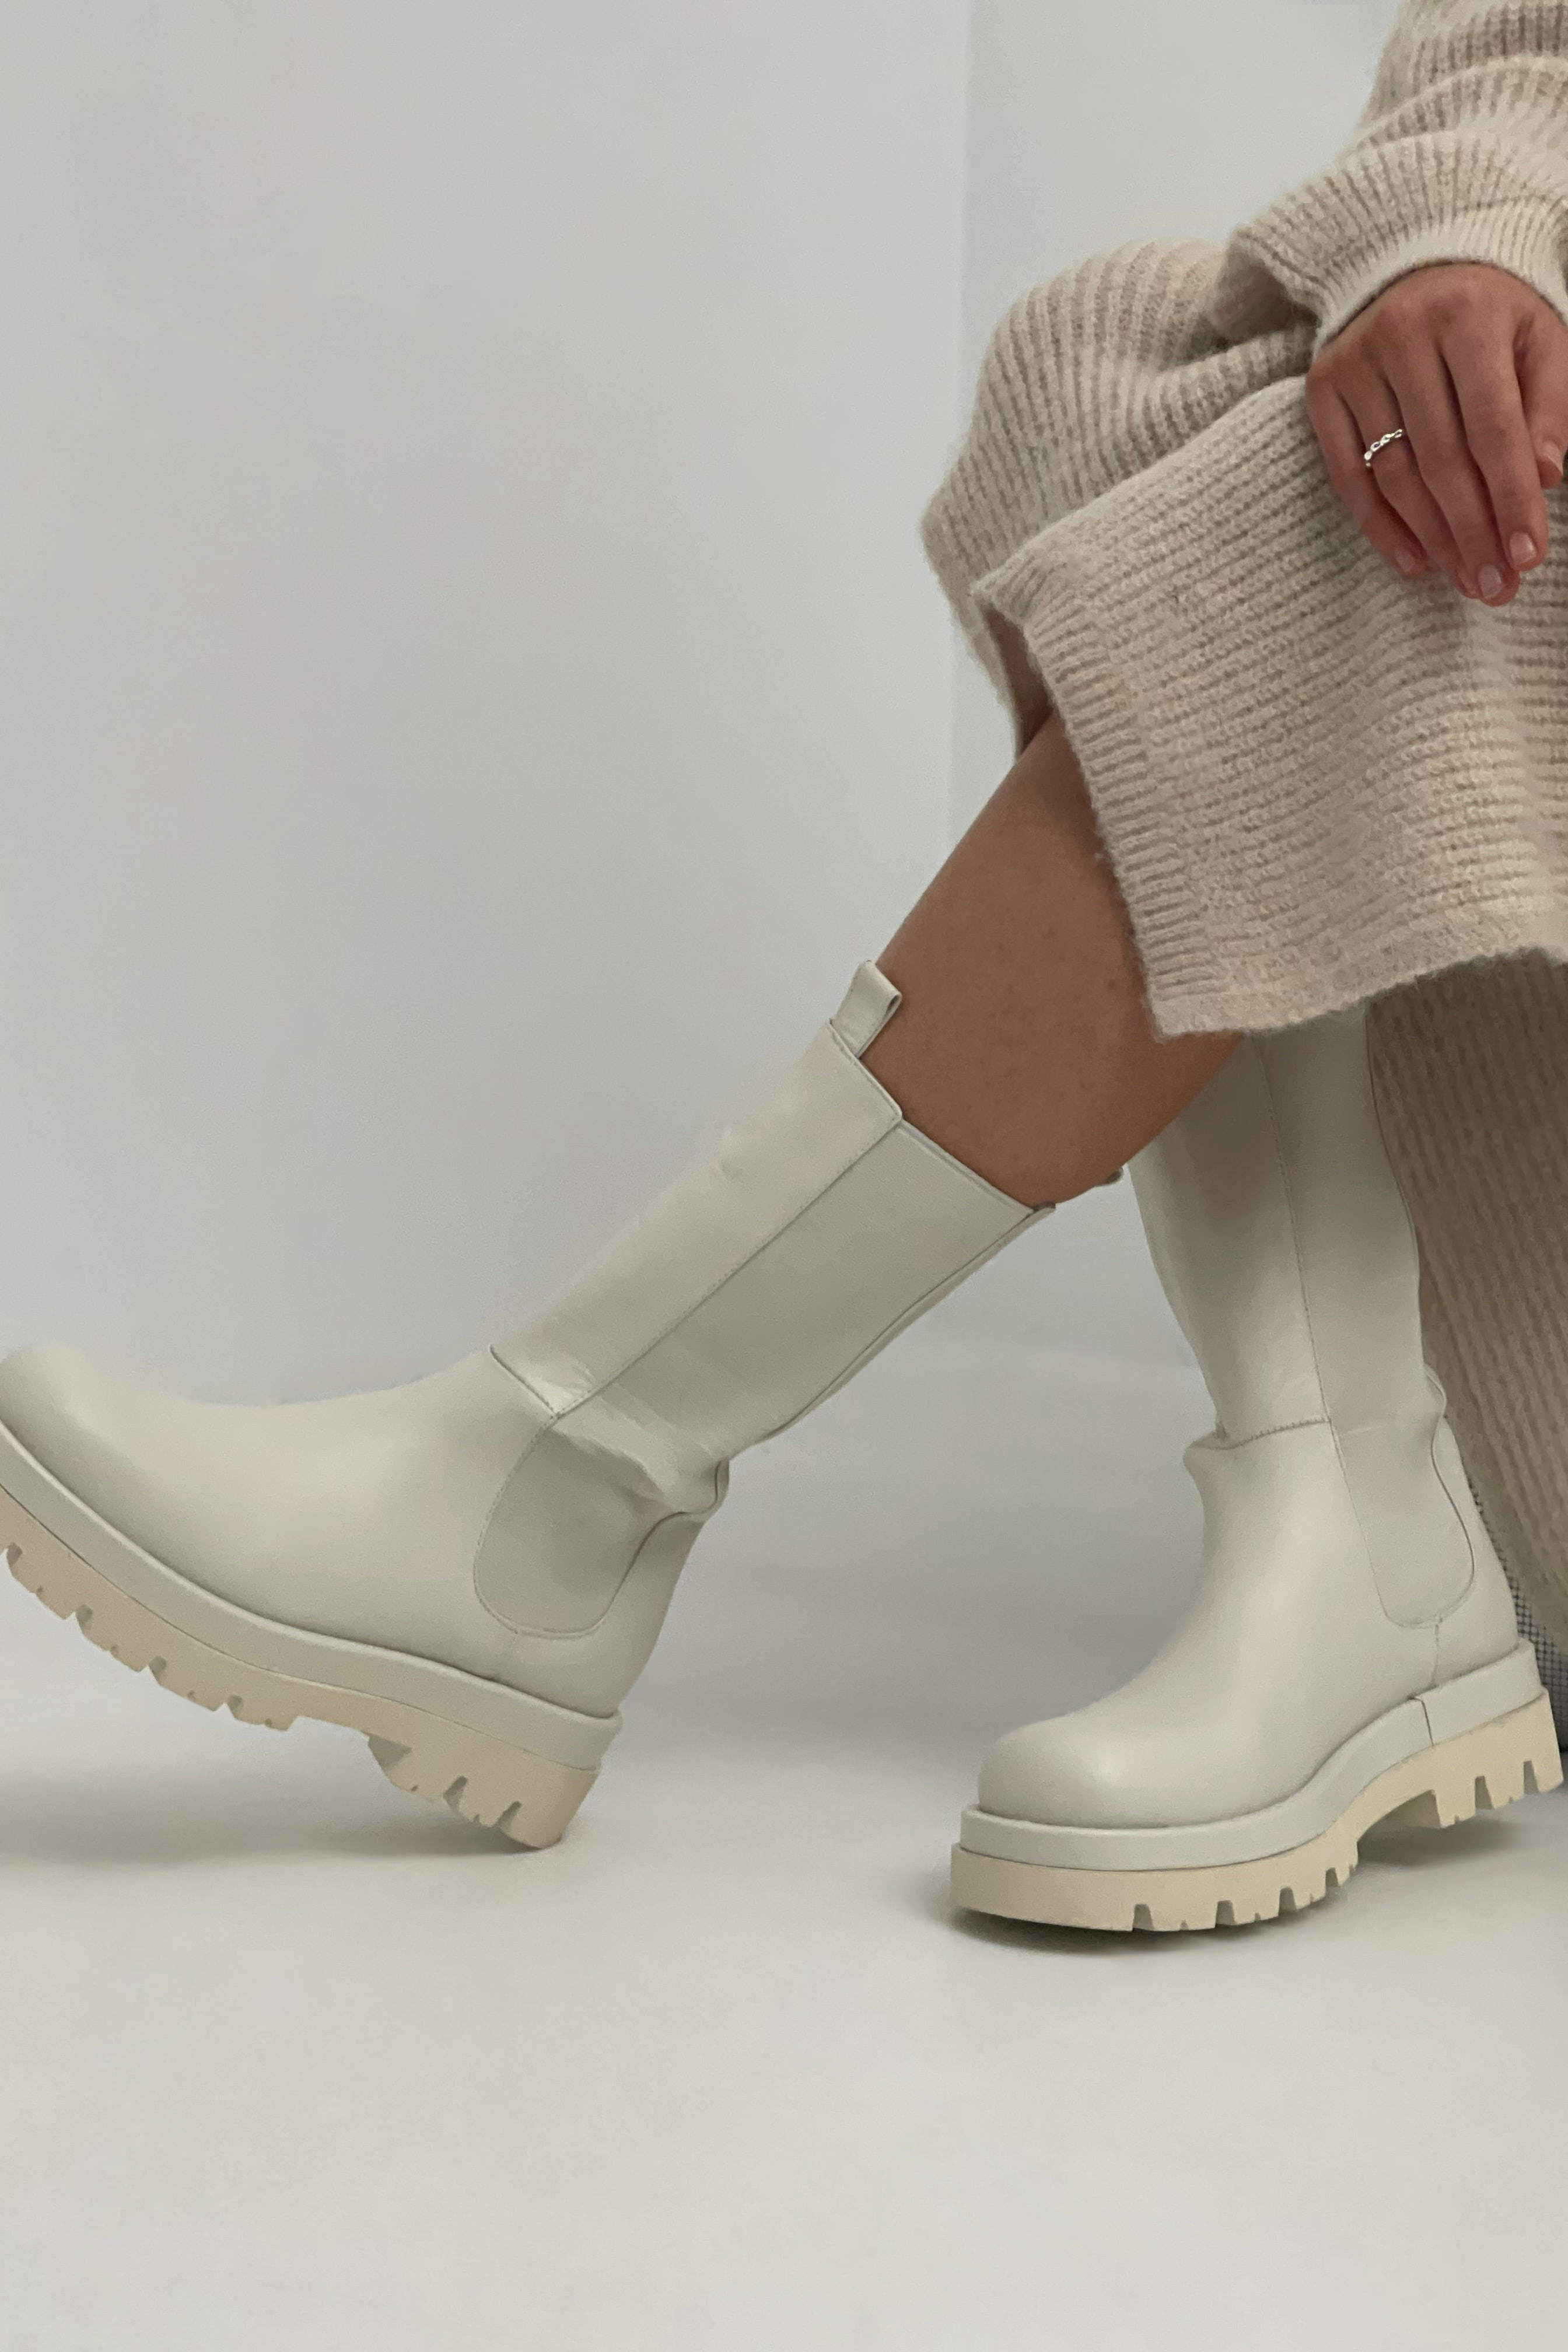 NA-KD Shoes Leather Calf Boots - Offwhite